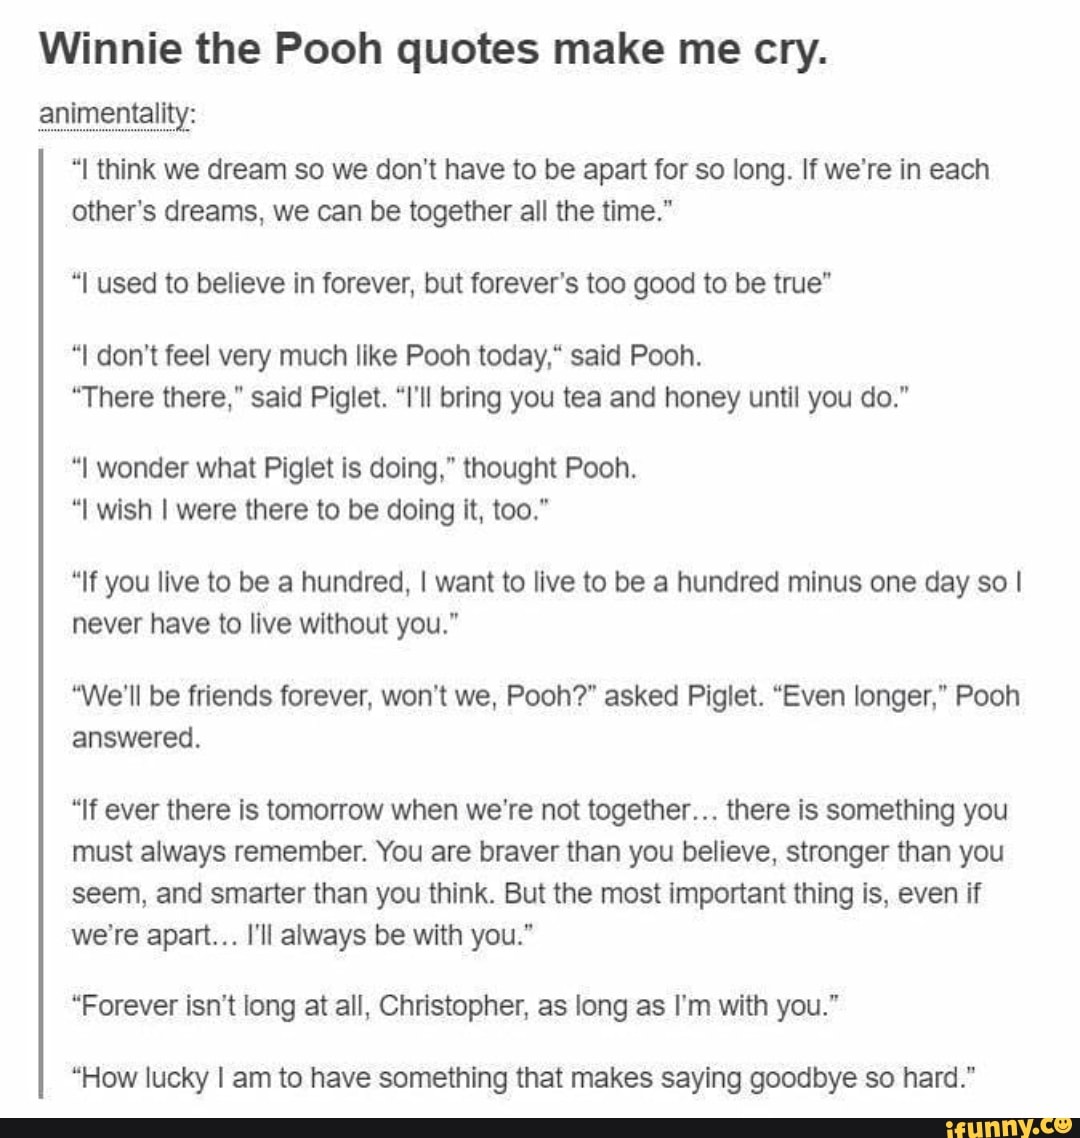 Winnie The Pooh Quotes Make Me Cry I Think We Dream So We Don T Have To Be Apart For So Long If We Re In Each Other S Dreams We Can Be Together All